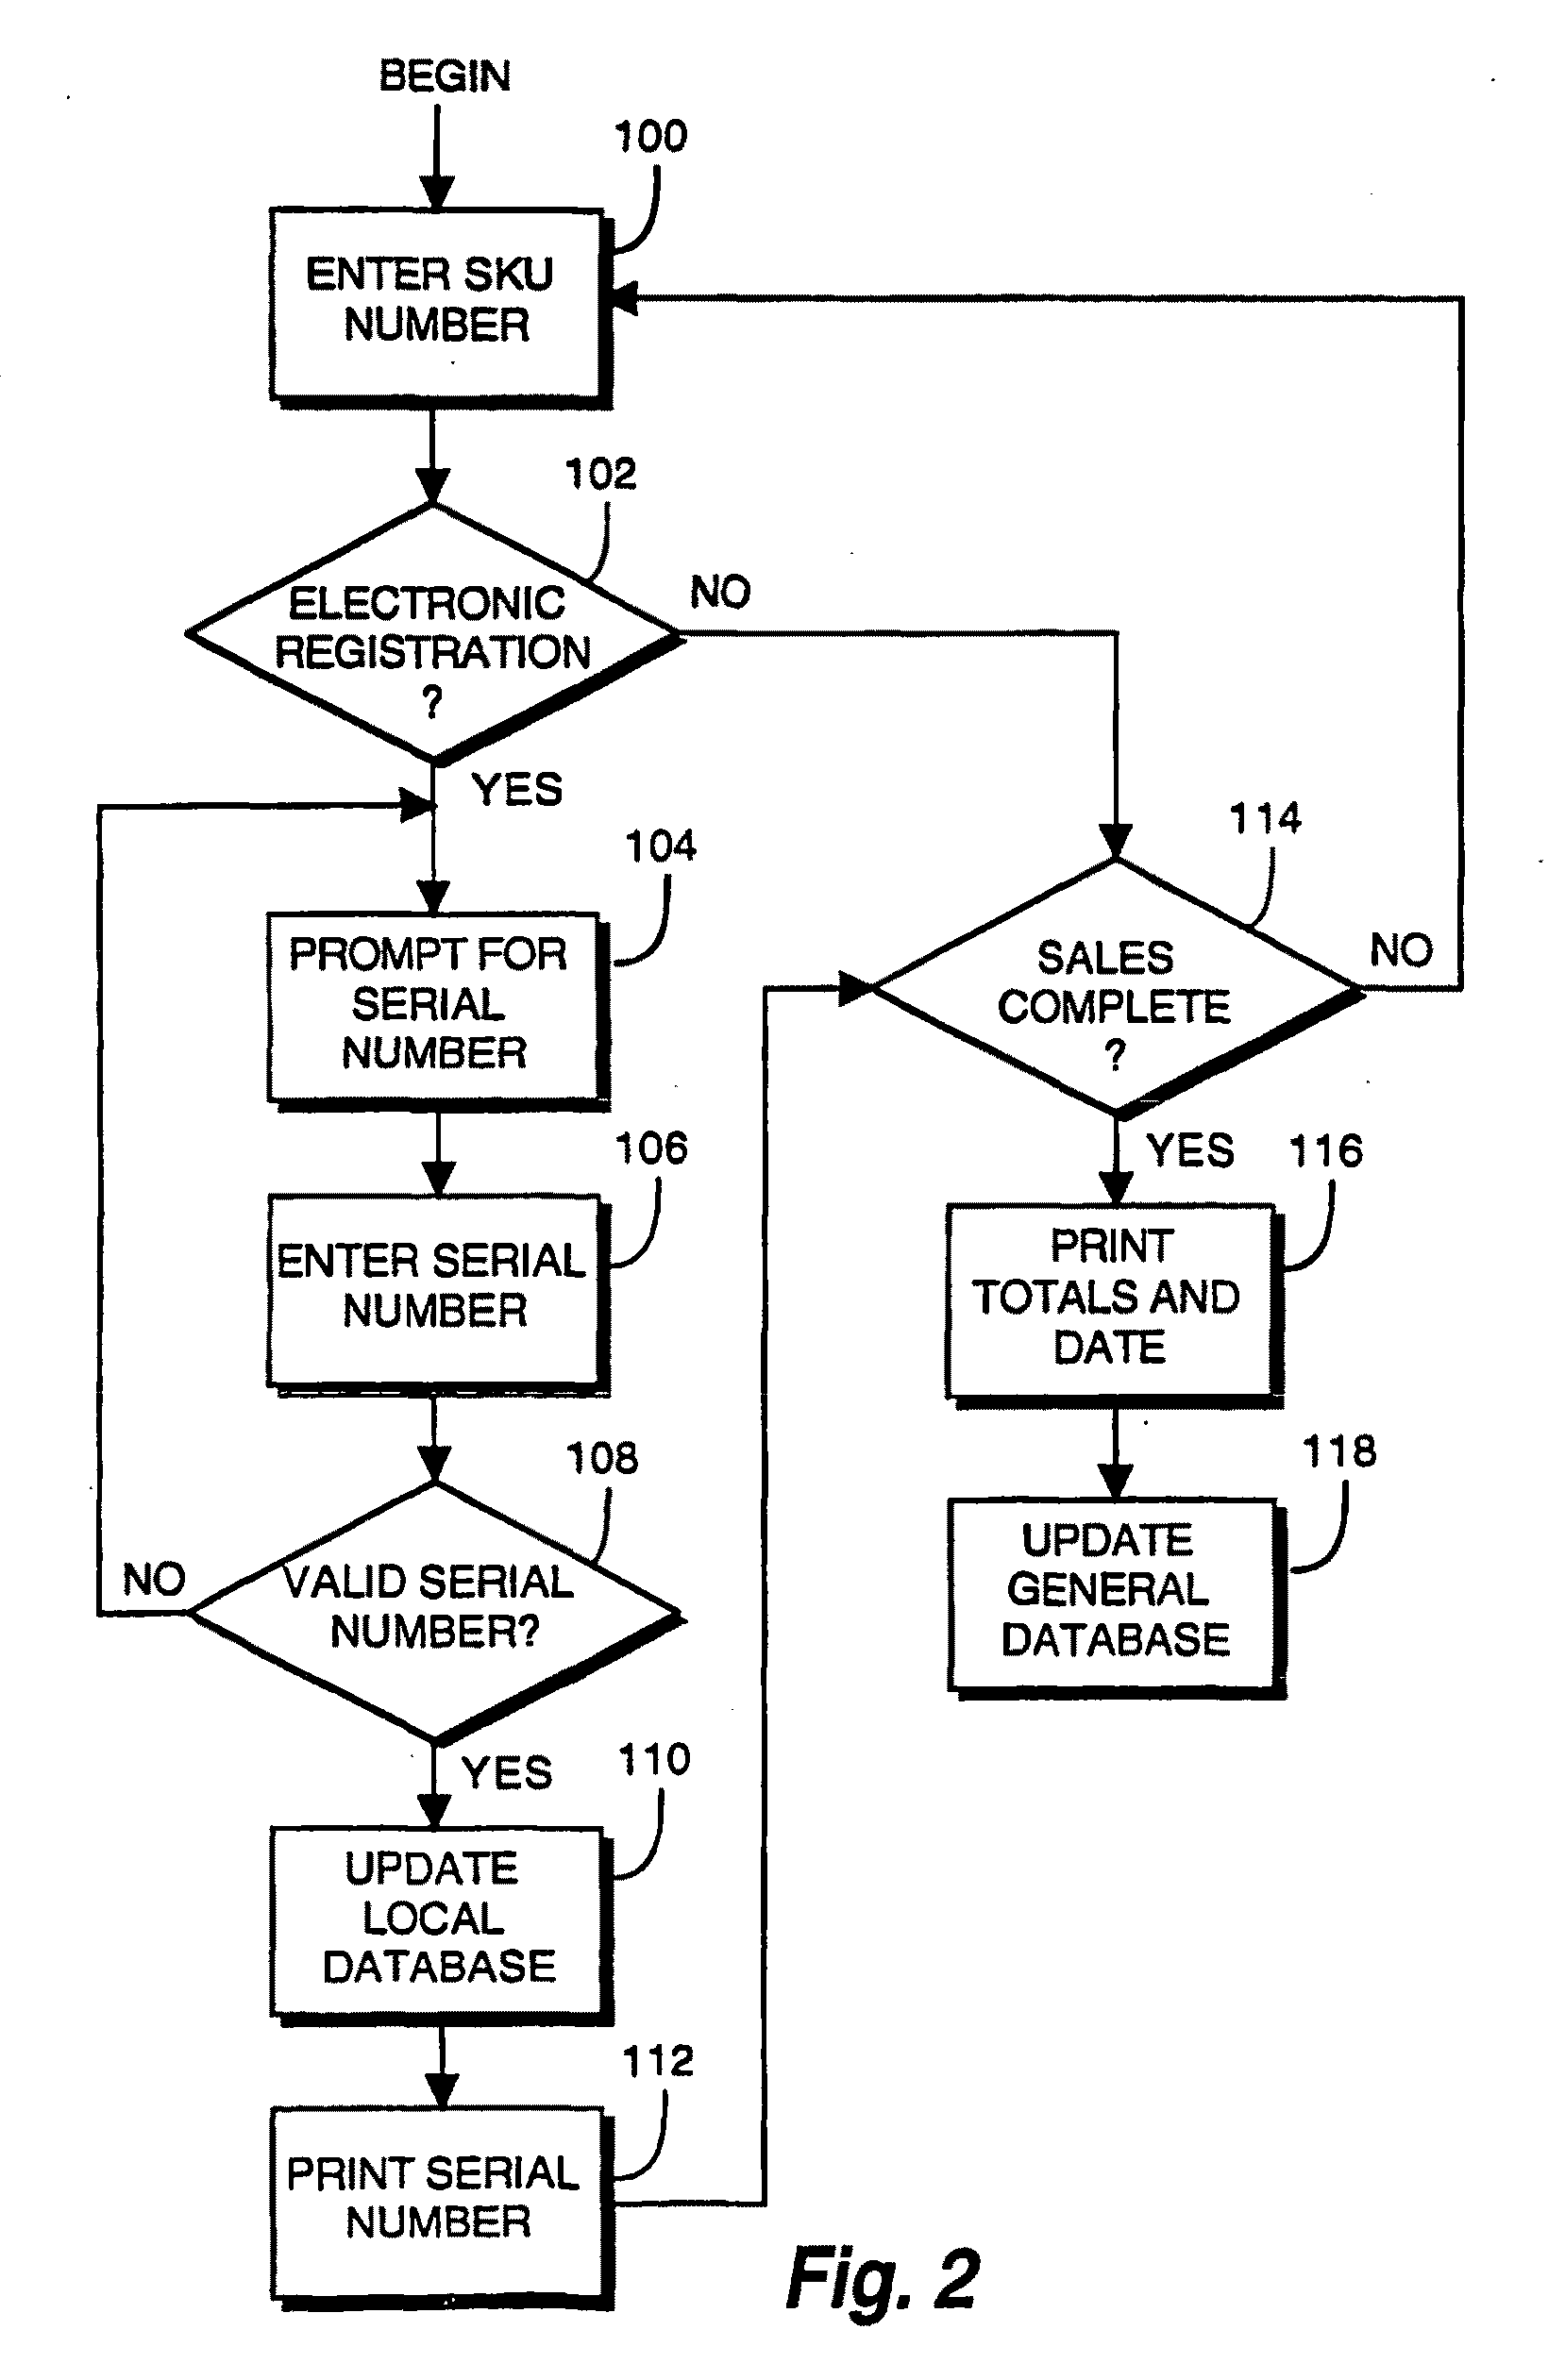 Method and apparatus for enabling purchasers of products to obtain return information and to initiate product returns via an on-line network connection